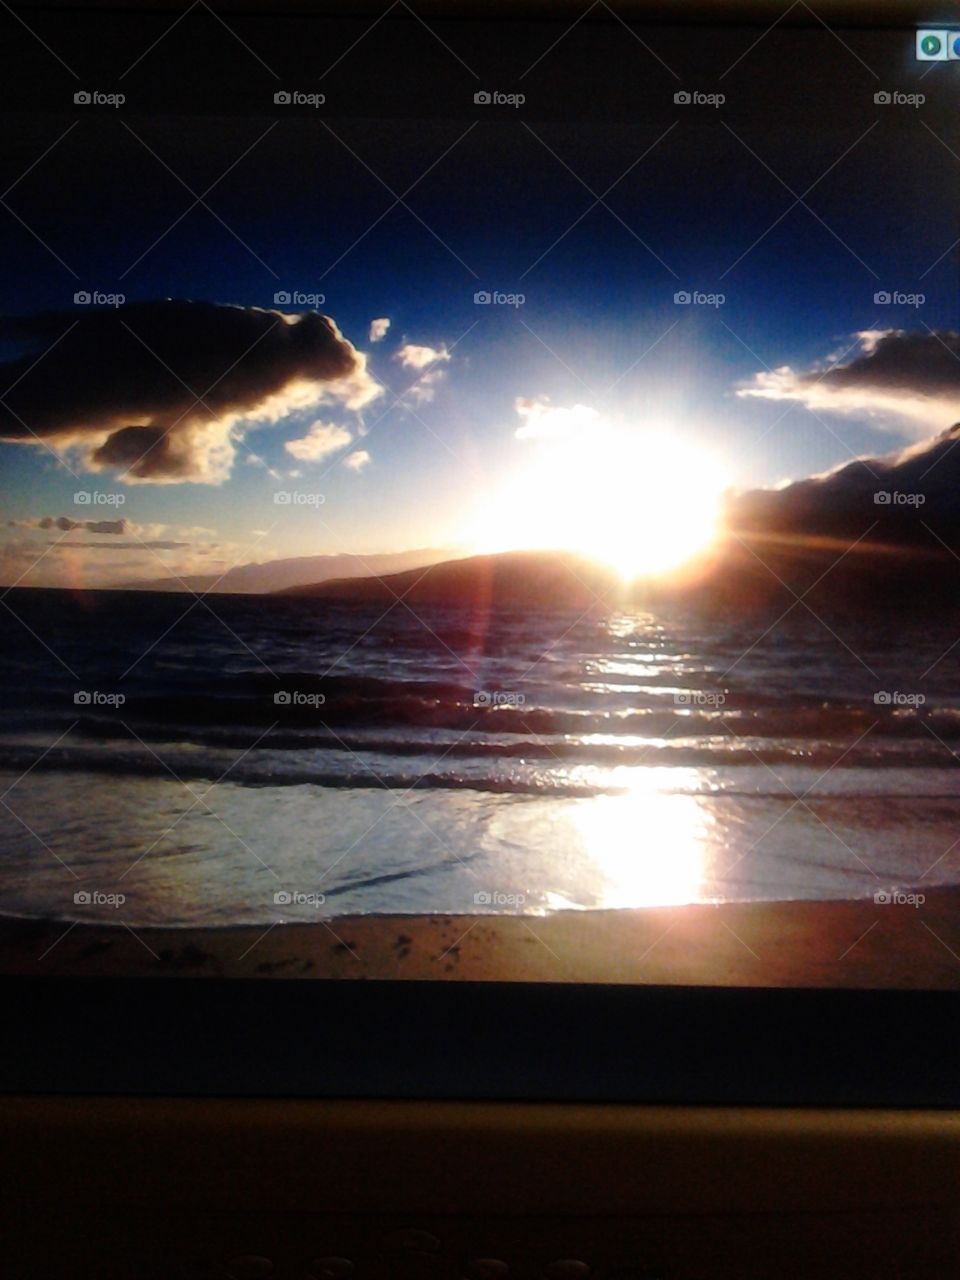 Spotlight. I was in Maui on vacation on the beach by myself enjoying the Sun setting